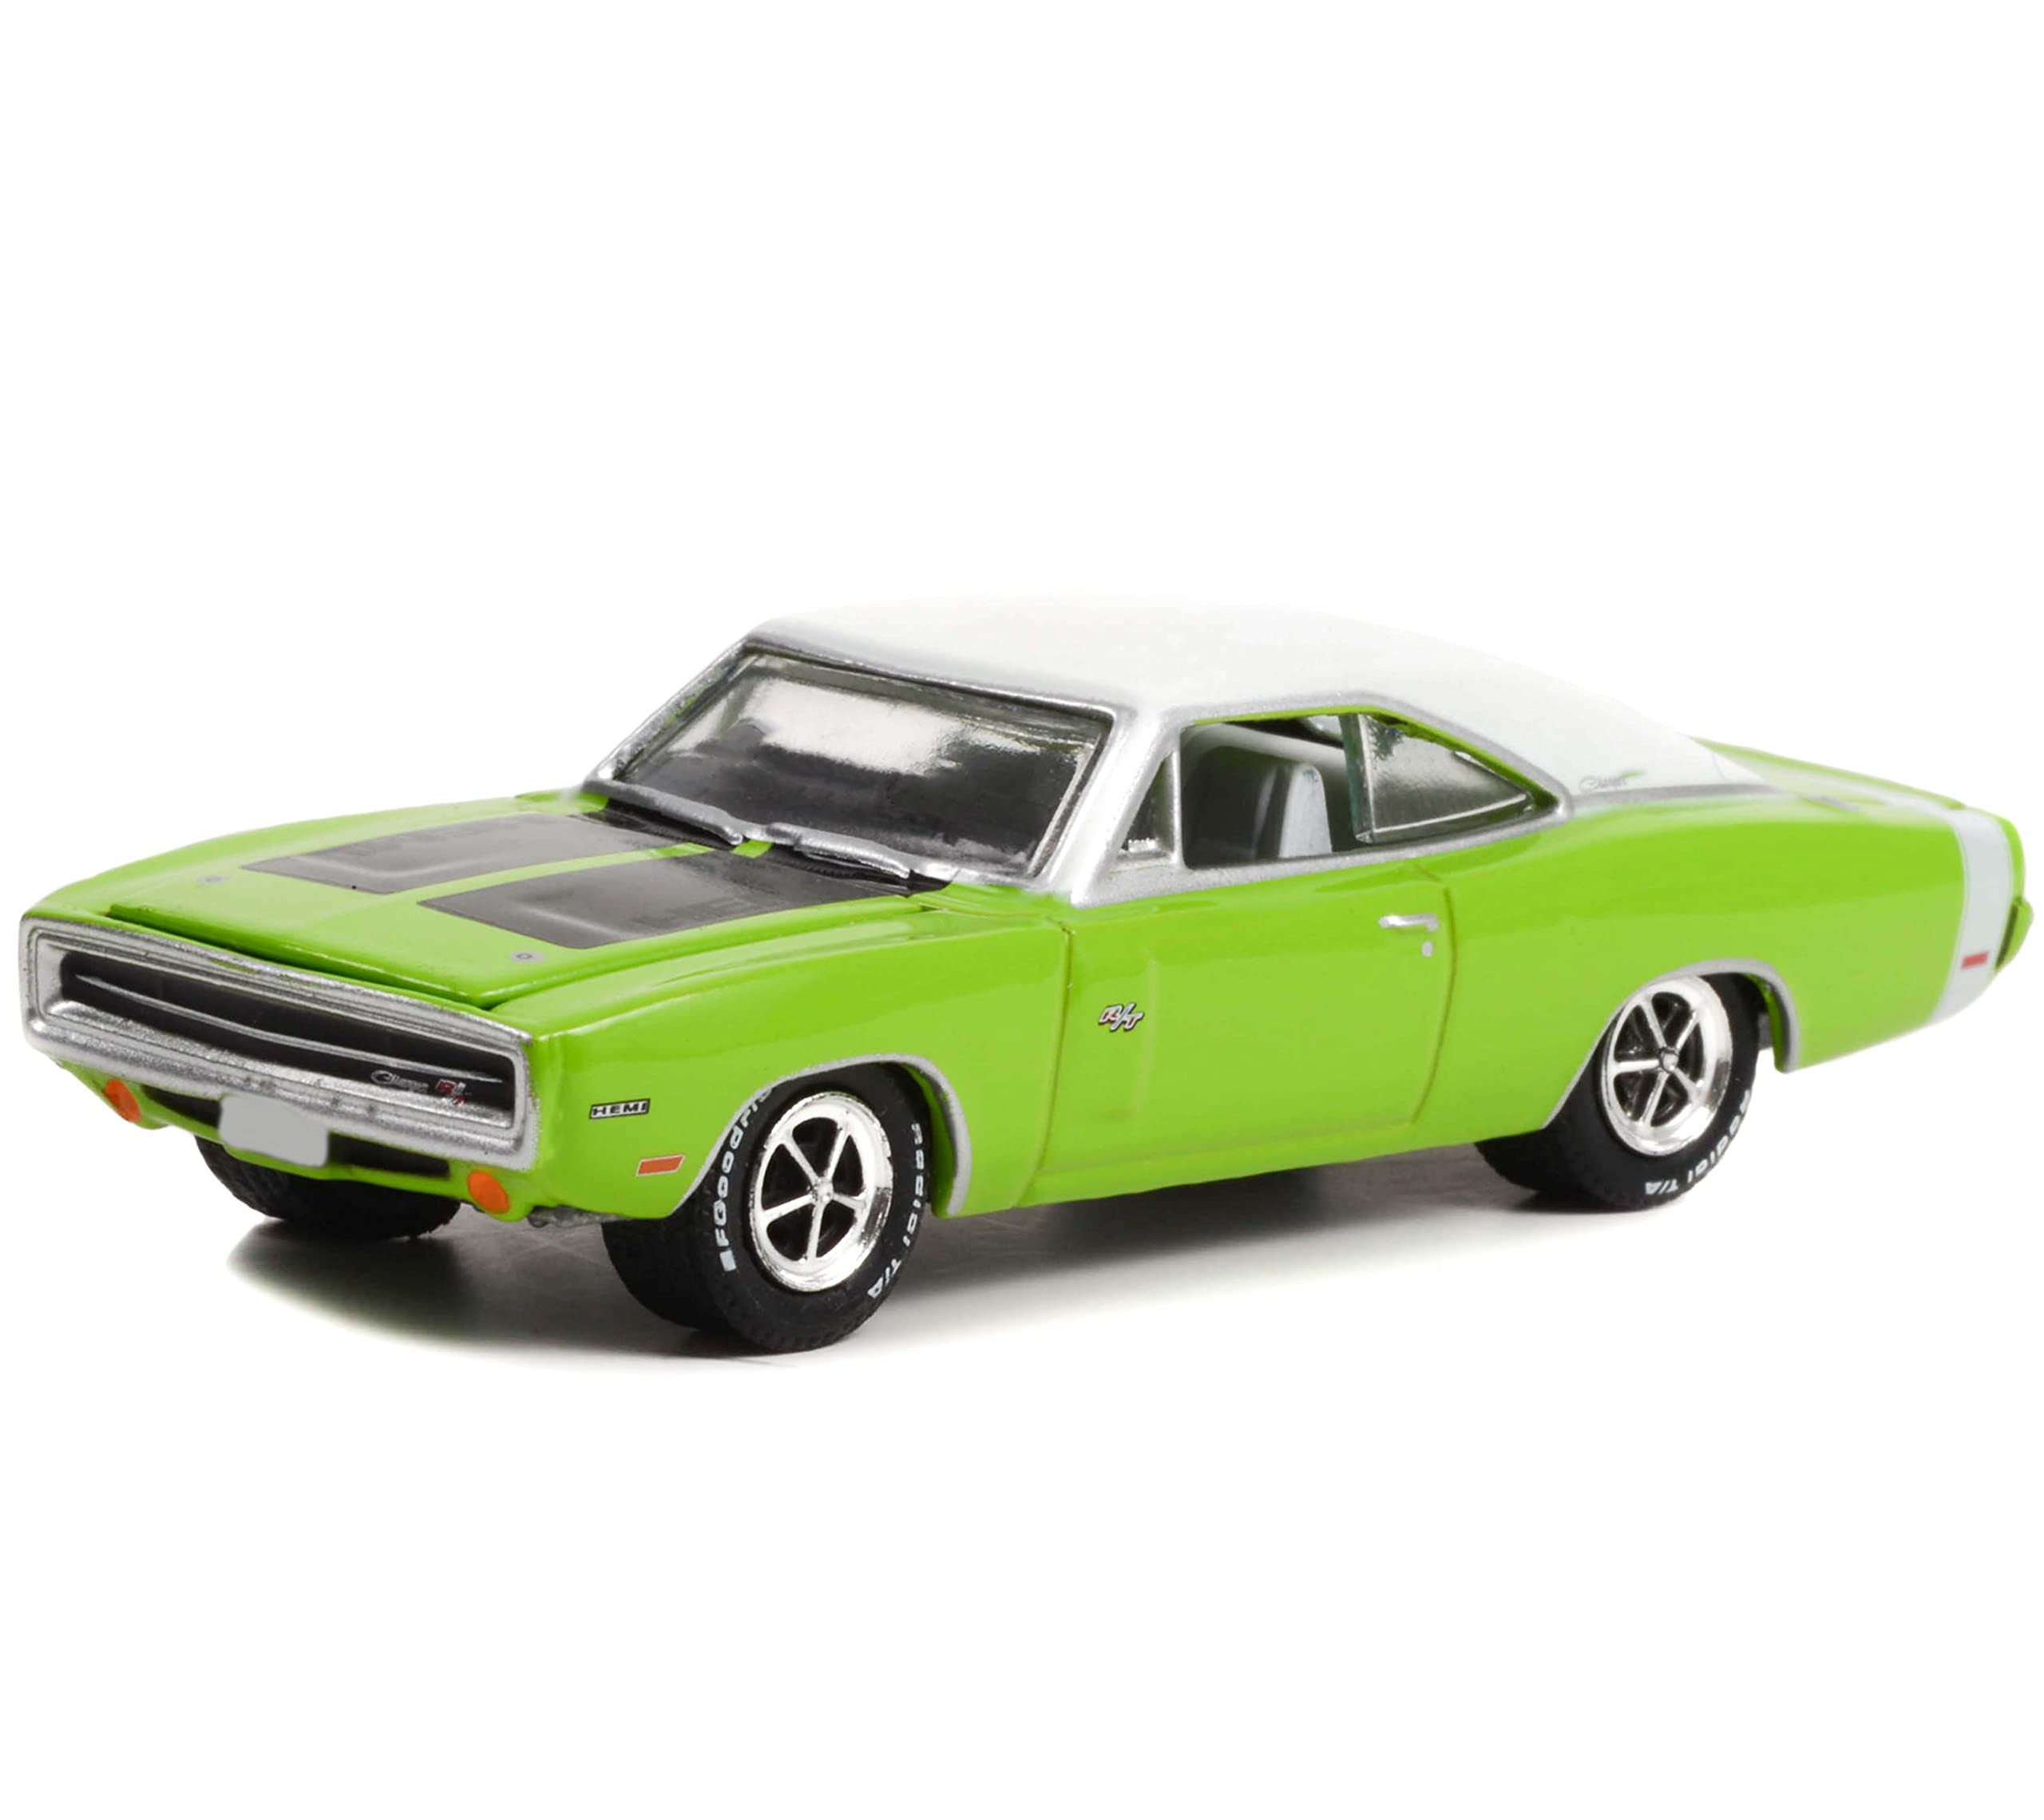 Toy Cars 1970 Charger HEMI R/T Sublime Green w/White Roof & White Tail Stripe (Lot #777) Barrett-Jackson Series 10 1/64 Diecast Model Car by Greenlight 37260 E